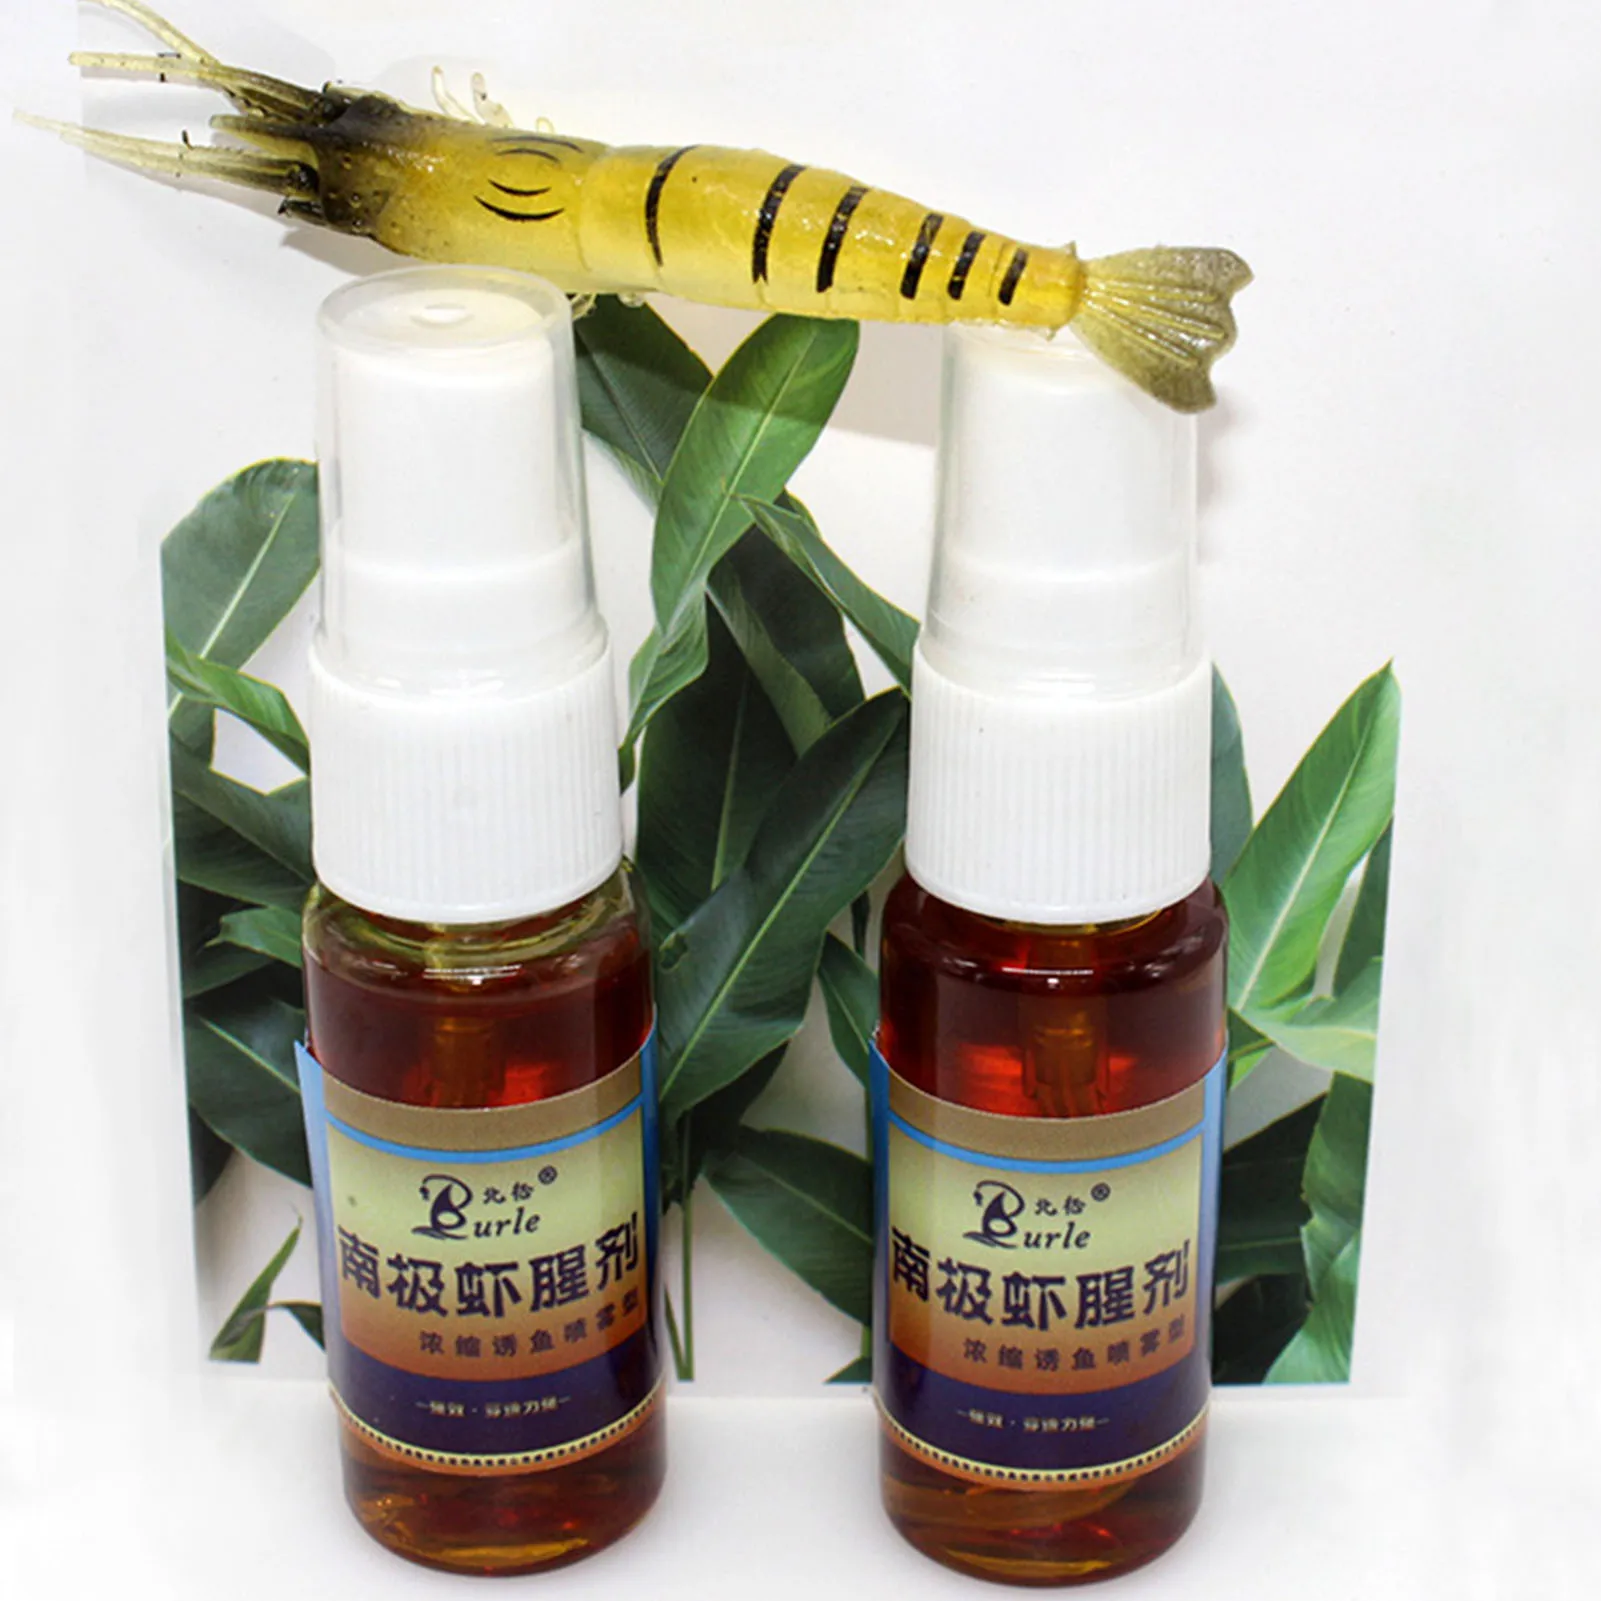 

20Ml Strong Fish Shrimp Attractant Jig Fishing Scent Spinner Flavor Oil Scents Cheese Smell Fishing Bait Lure Attractant Tackle